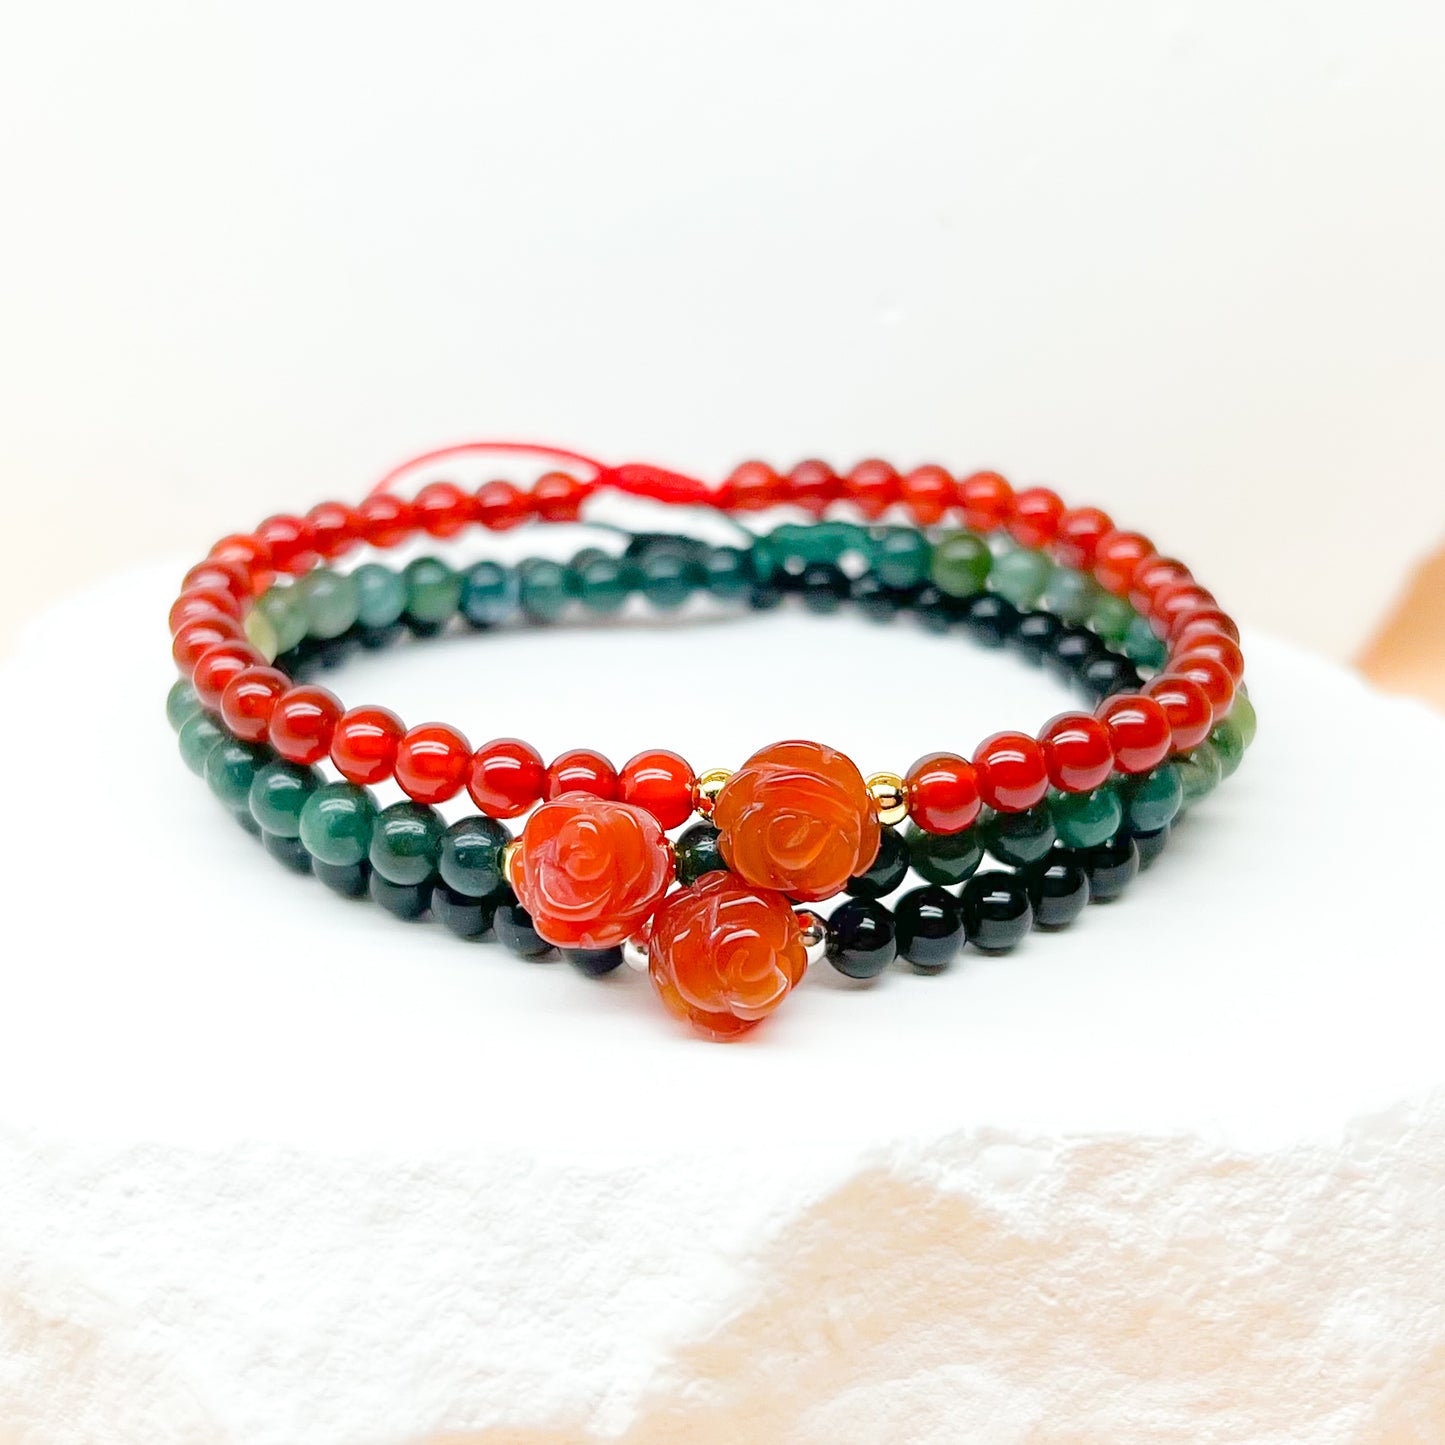 Rose agate, onyx and moss agate bracelet